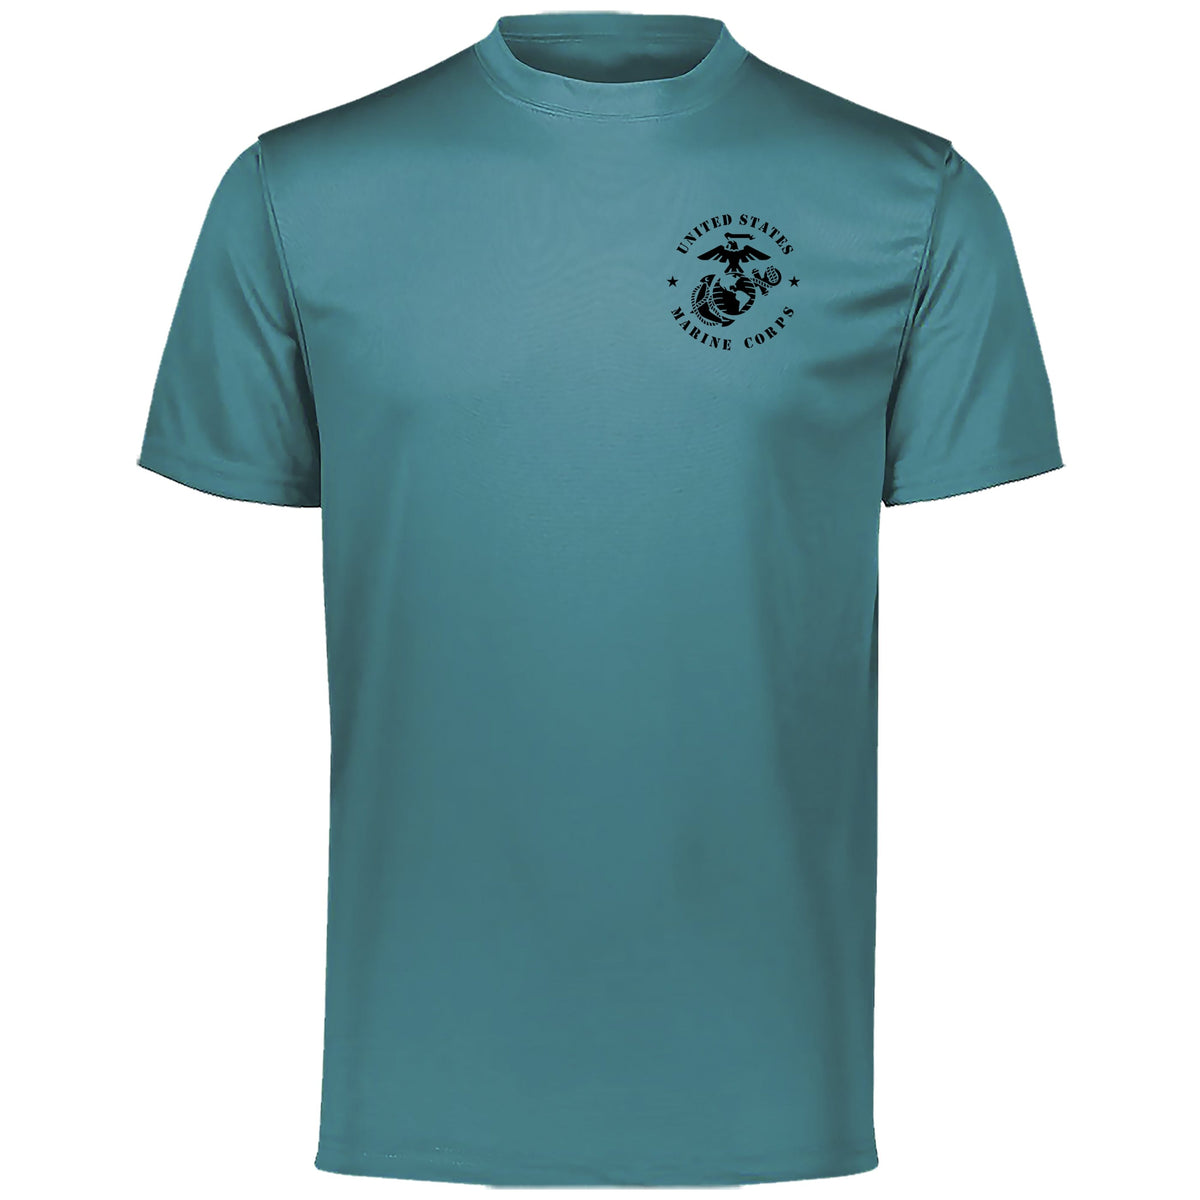 Closeout Full Circle BLK USMC Chest Seal Performance Teal  & Silver Tee